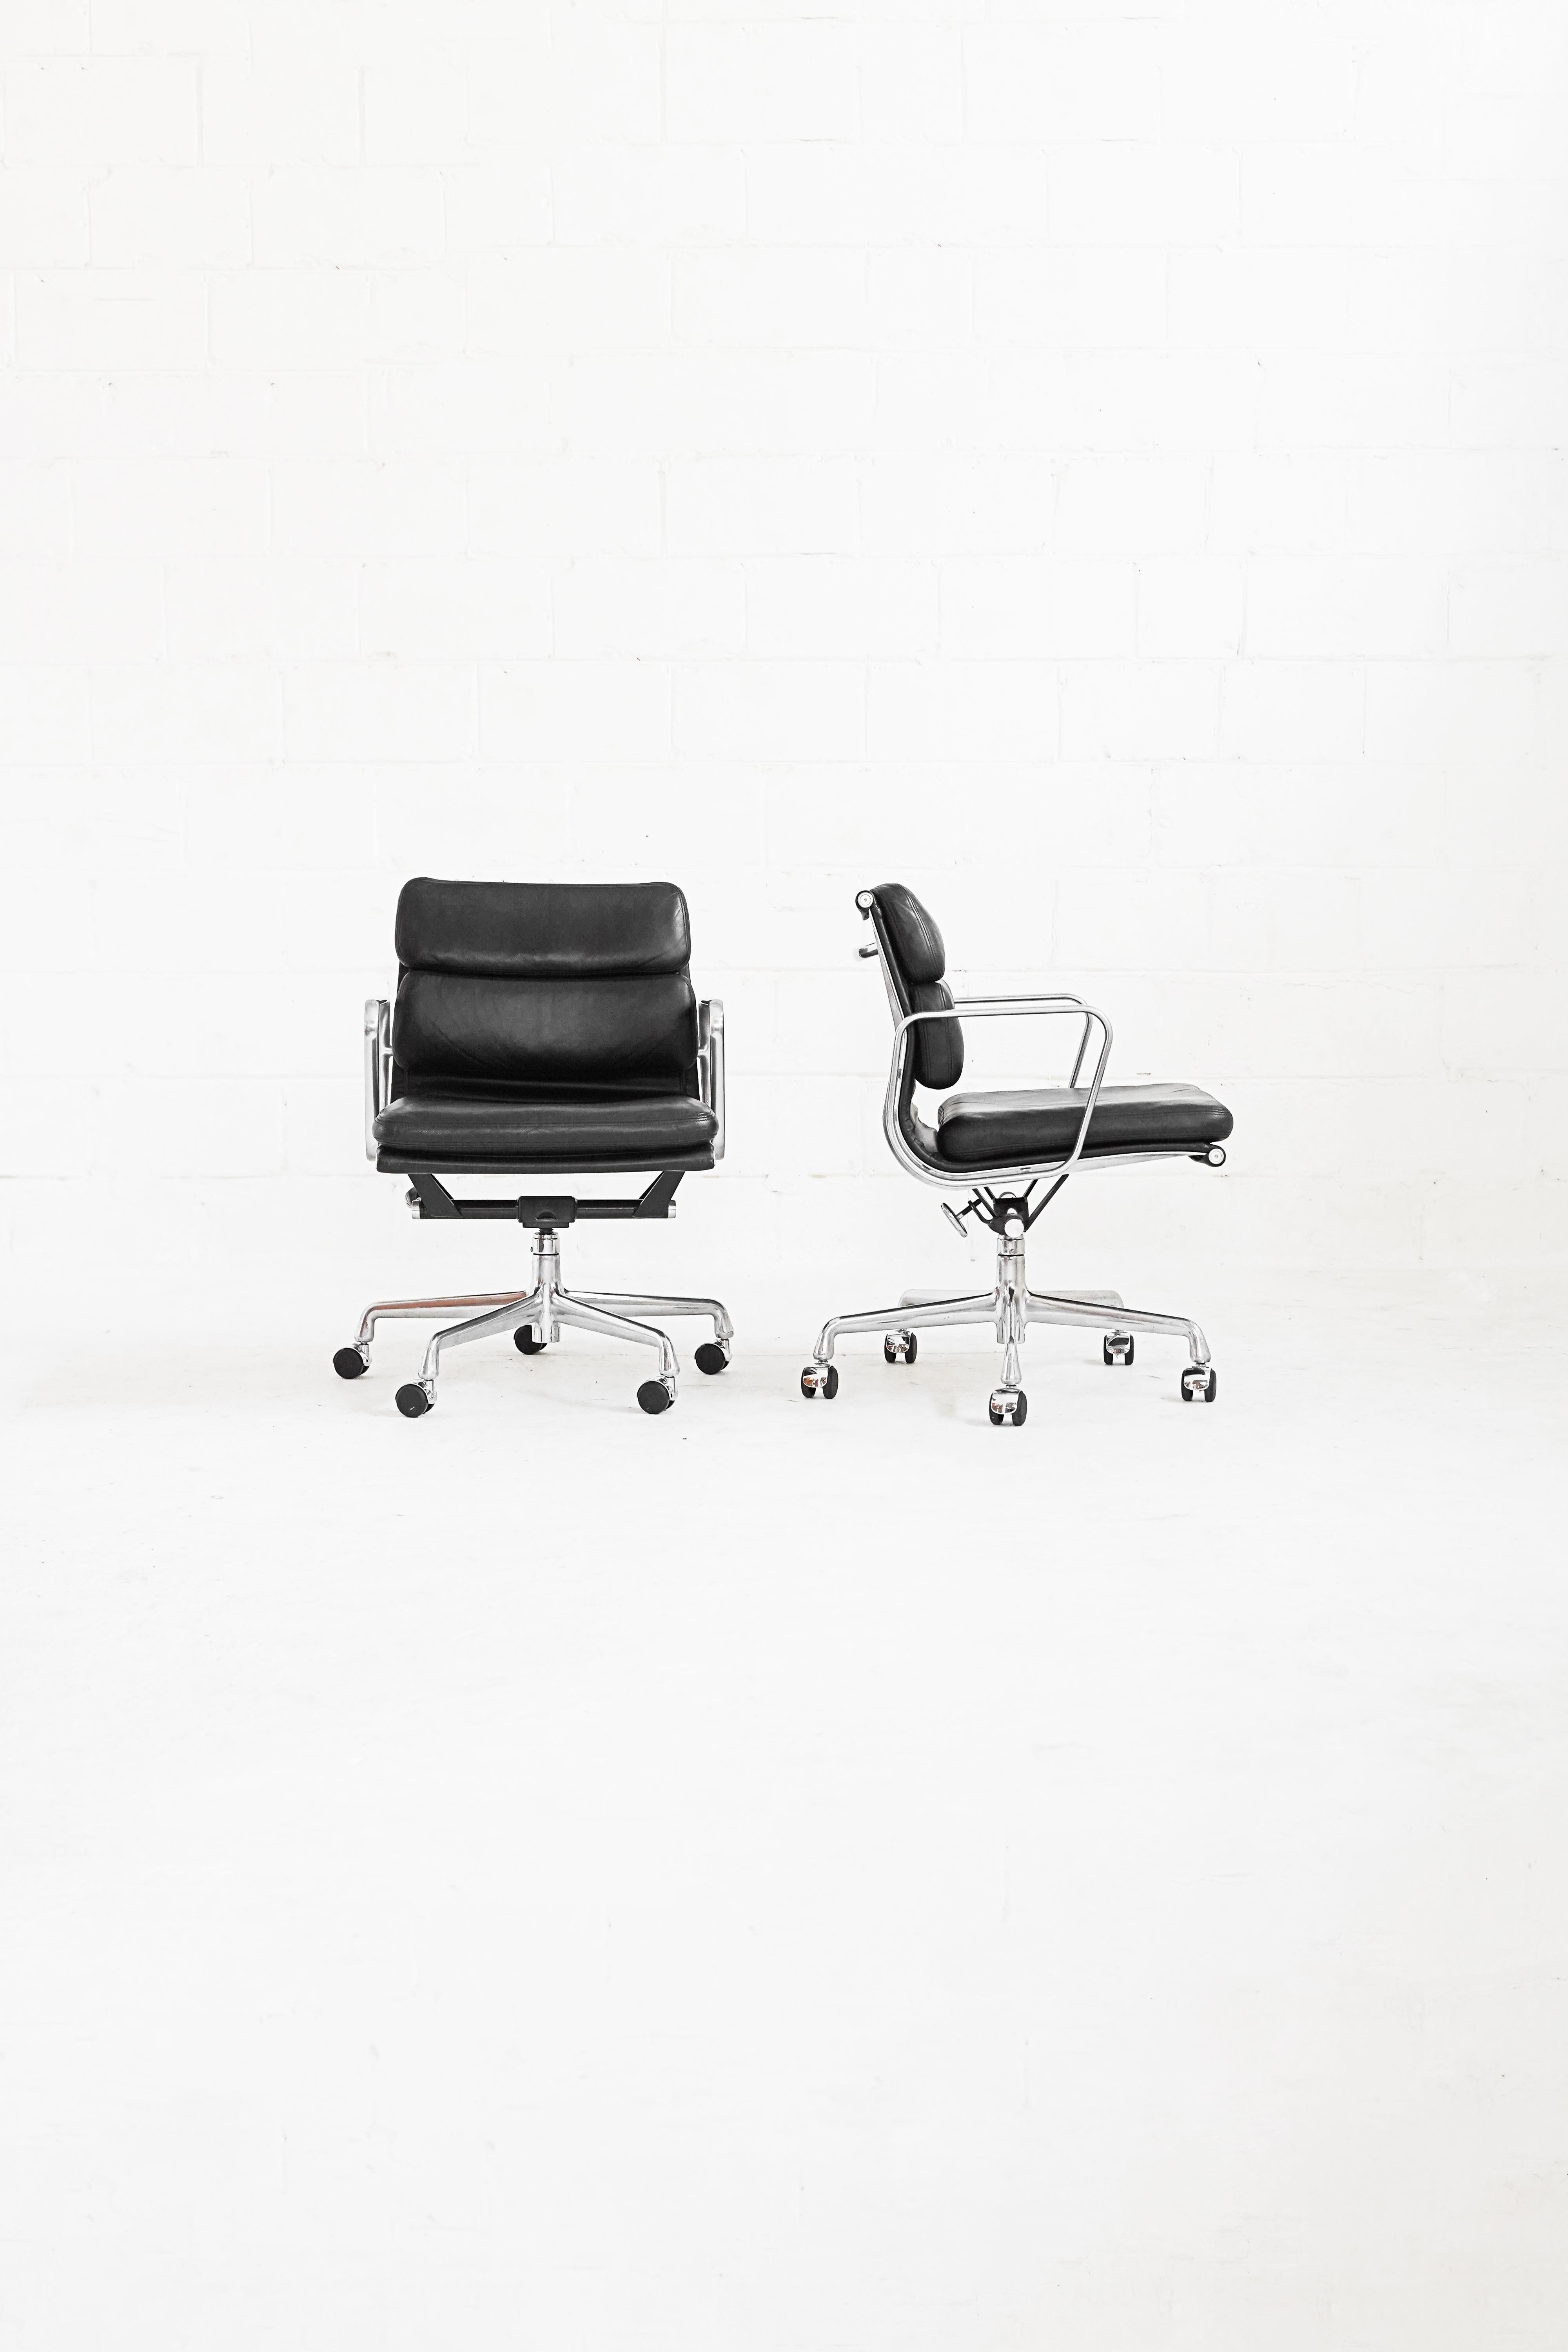 Eames Soft Pad Management Chair by Charles and Ray Eames for Herman Miller 4